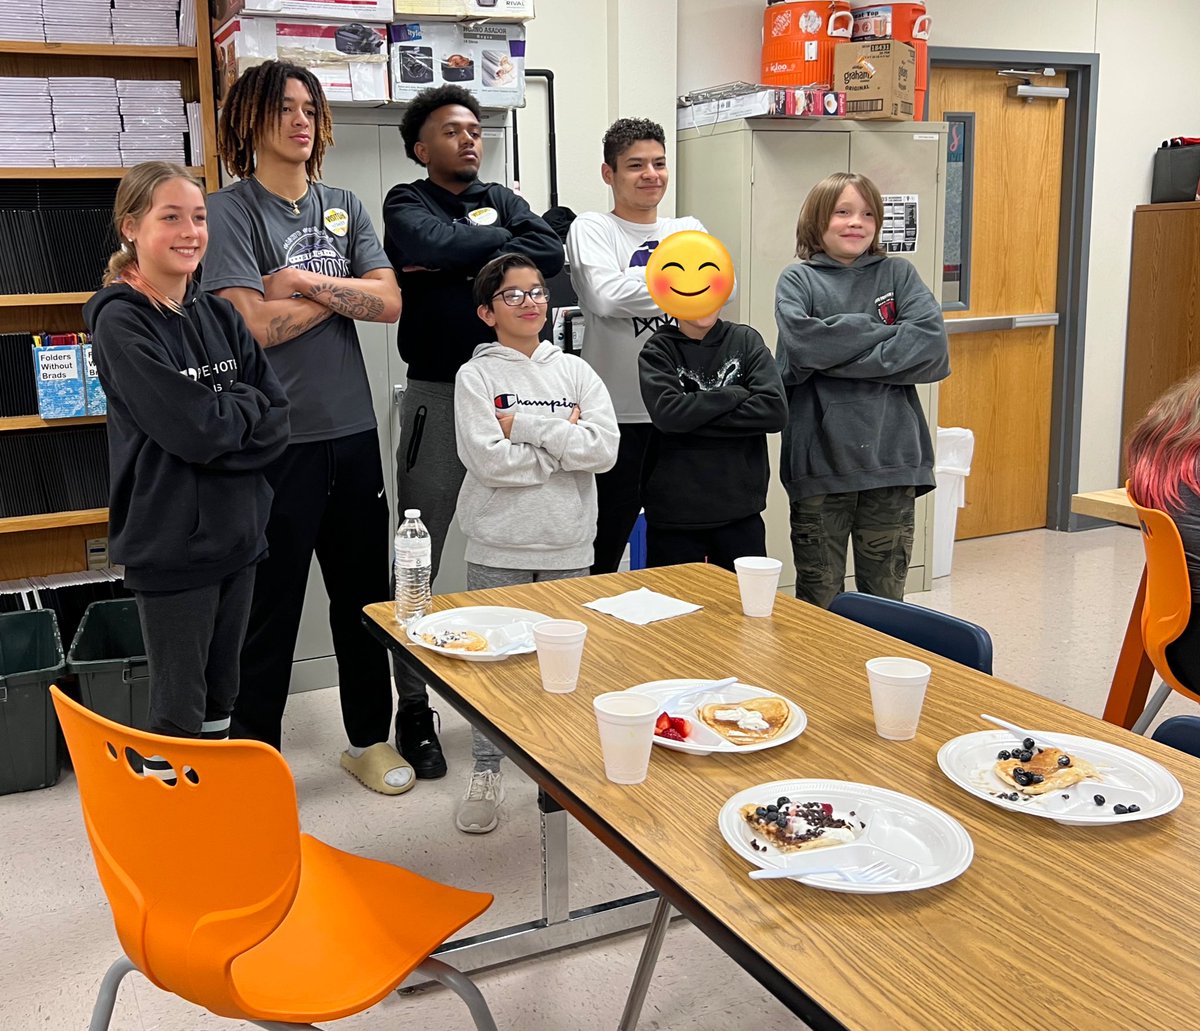 Pancake breakfast and a special thanks to @RattlerMBB for coming over to help us celebrate team Little’s Furries on their March Madness attendance win 🏆 #schooleveryday #attendance @SanMarcosCISD @RattlerUp @Travis_SMCISD @SMCISD_StSrv